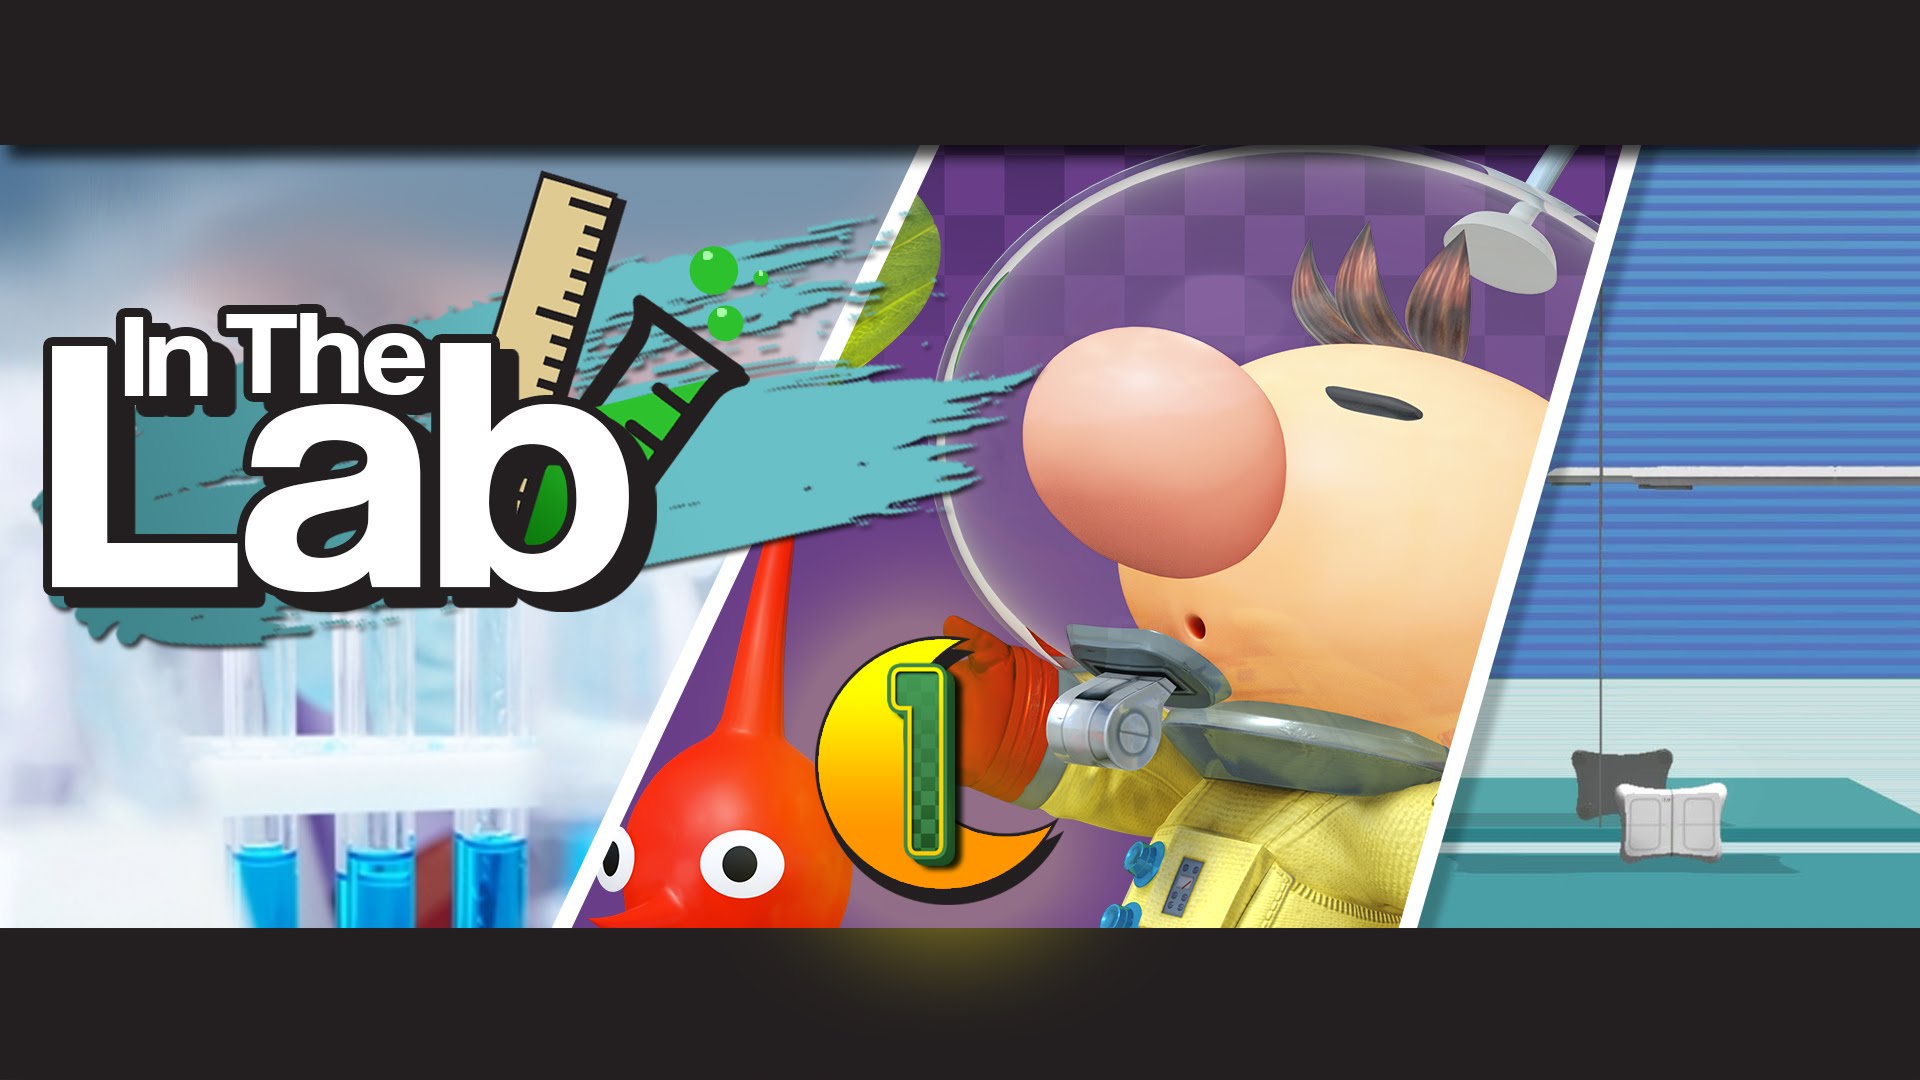 Super Smash Bros. Wii U | In the Lab with Olimar #1 - YouTube